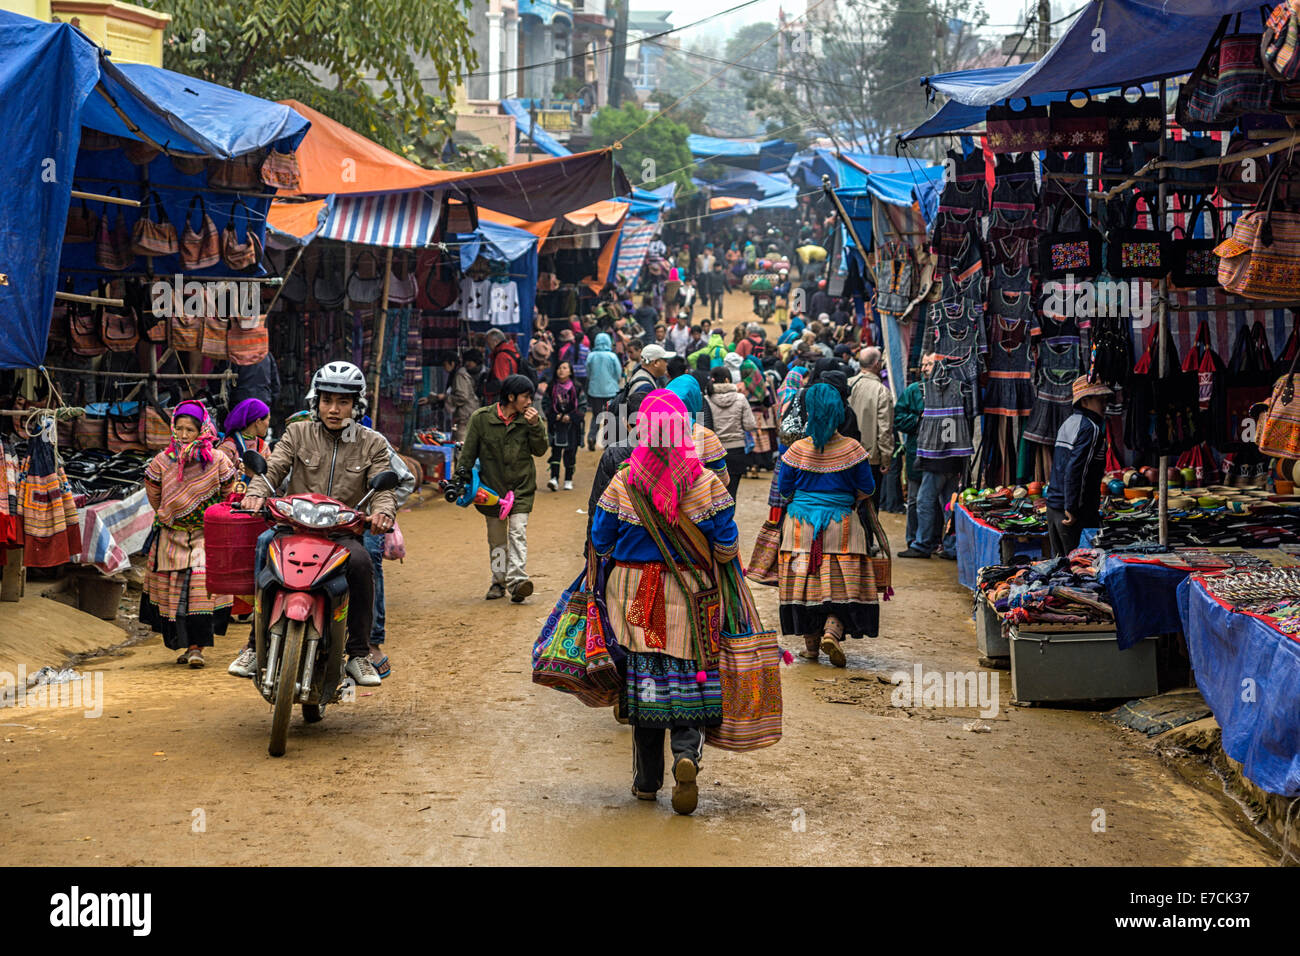 Sunday market during winter caters to Hmong people. Stock Photo